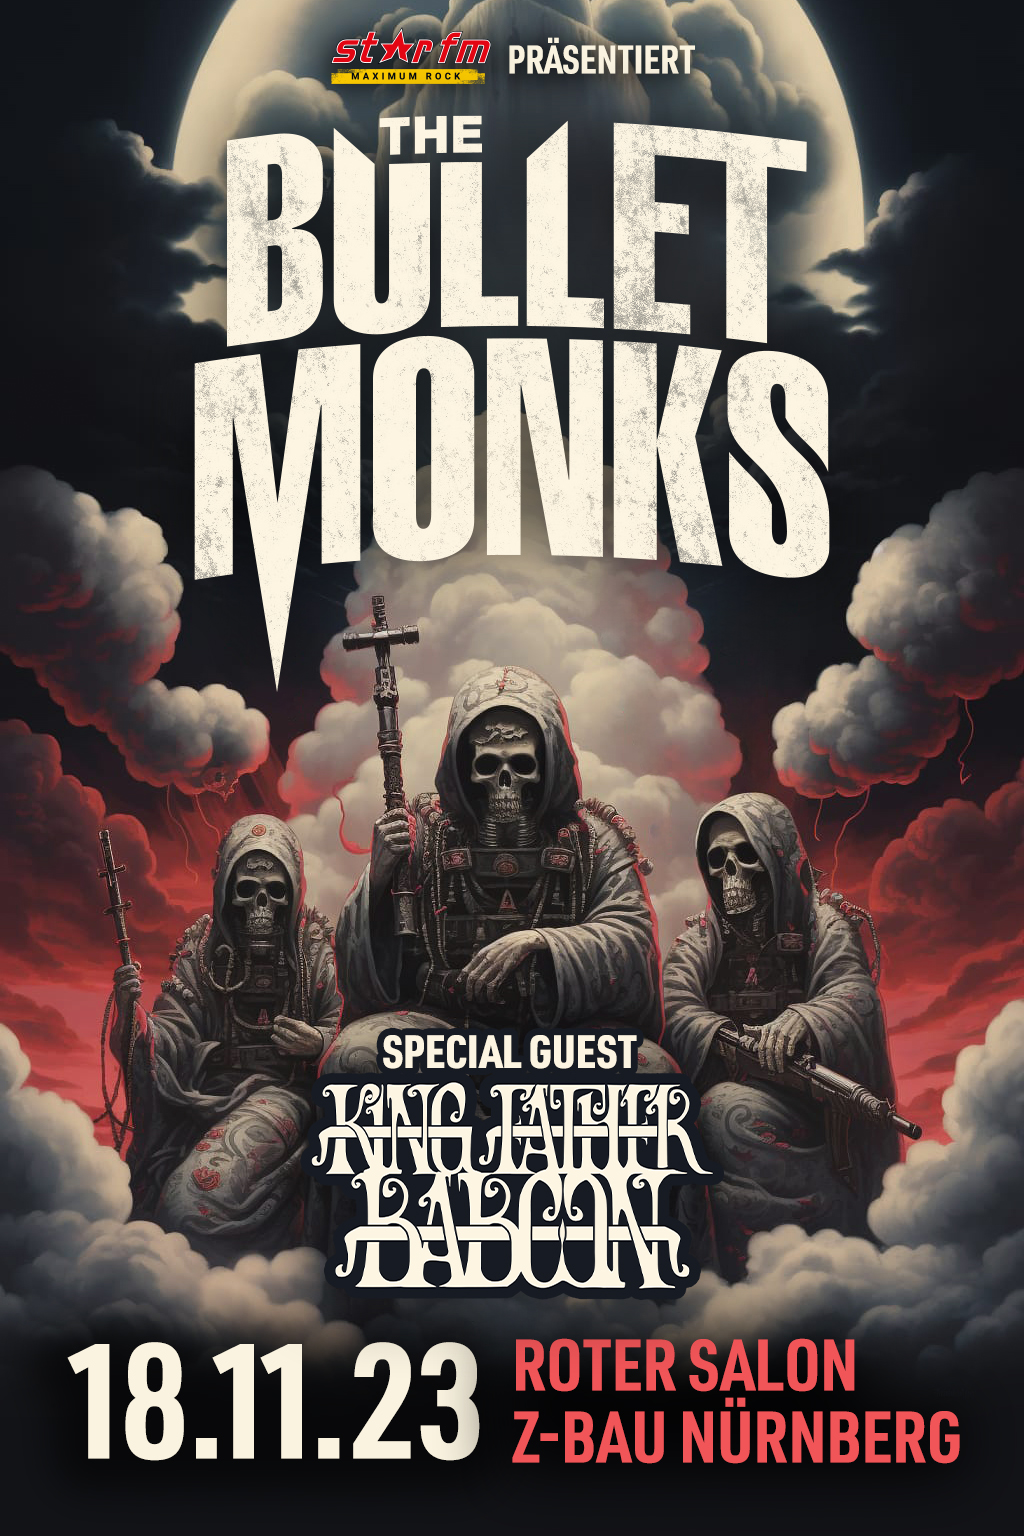 Bulletmonks and special guests King Father Baboon - 18.11.2023 Roter Salon, Z-Bau Nürnberg